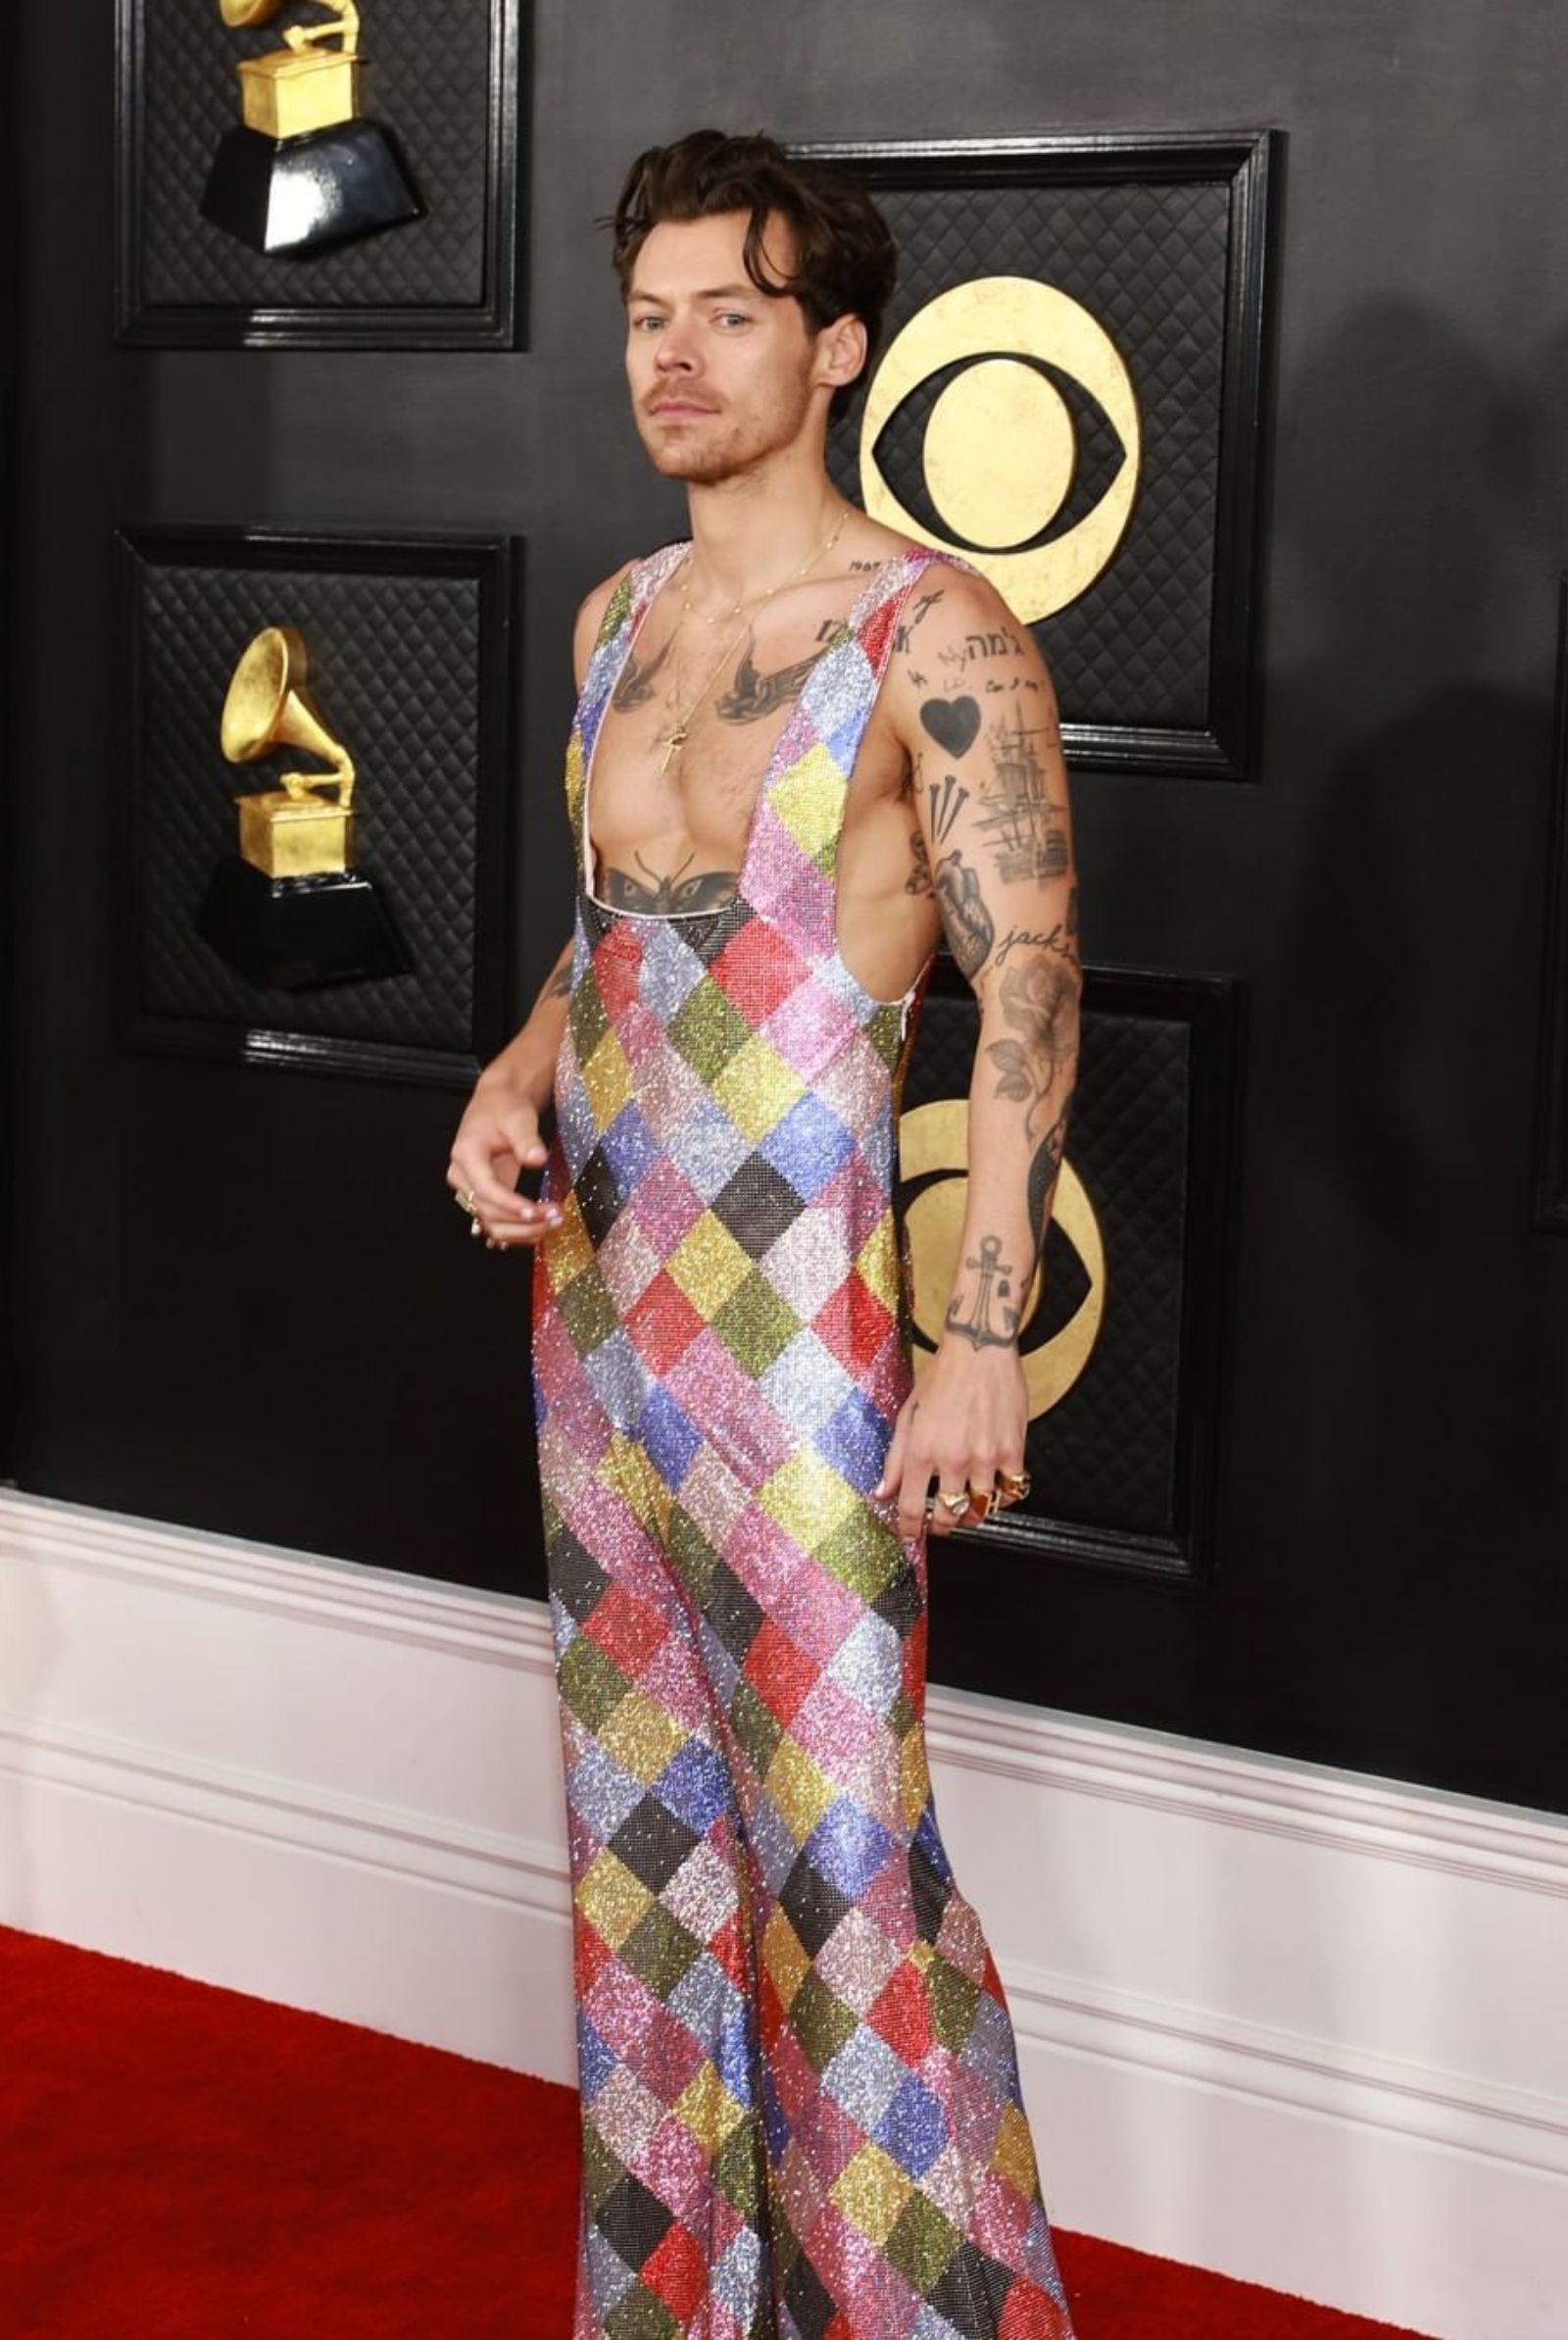 MEGA’s 10 Best Dressed at the Grammys - Harry Styles